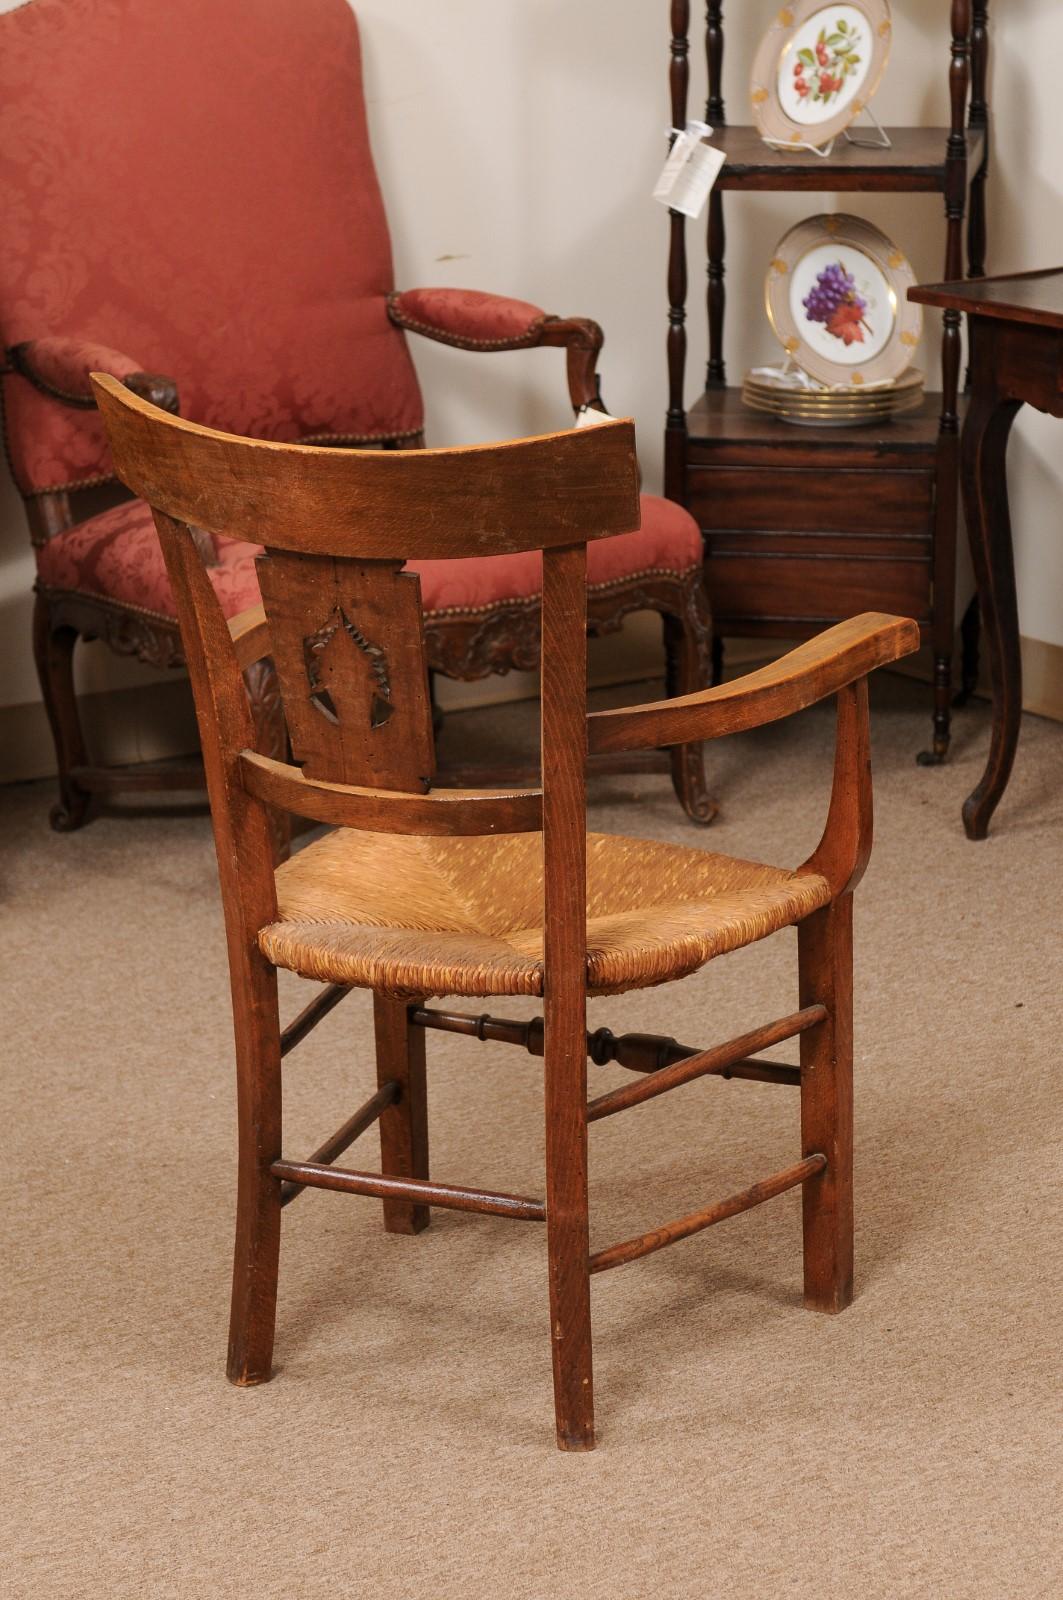 Fruitwood Rush Seat Armchair with Flower Basket Backsplat, Italy ca. 1850 For Sale 8